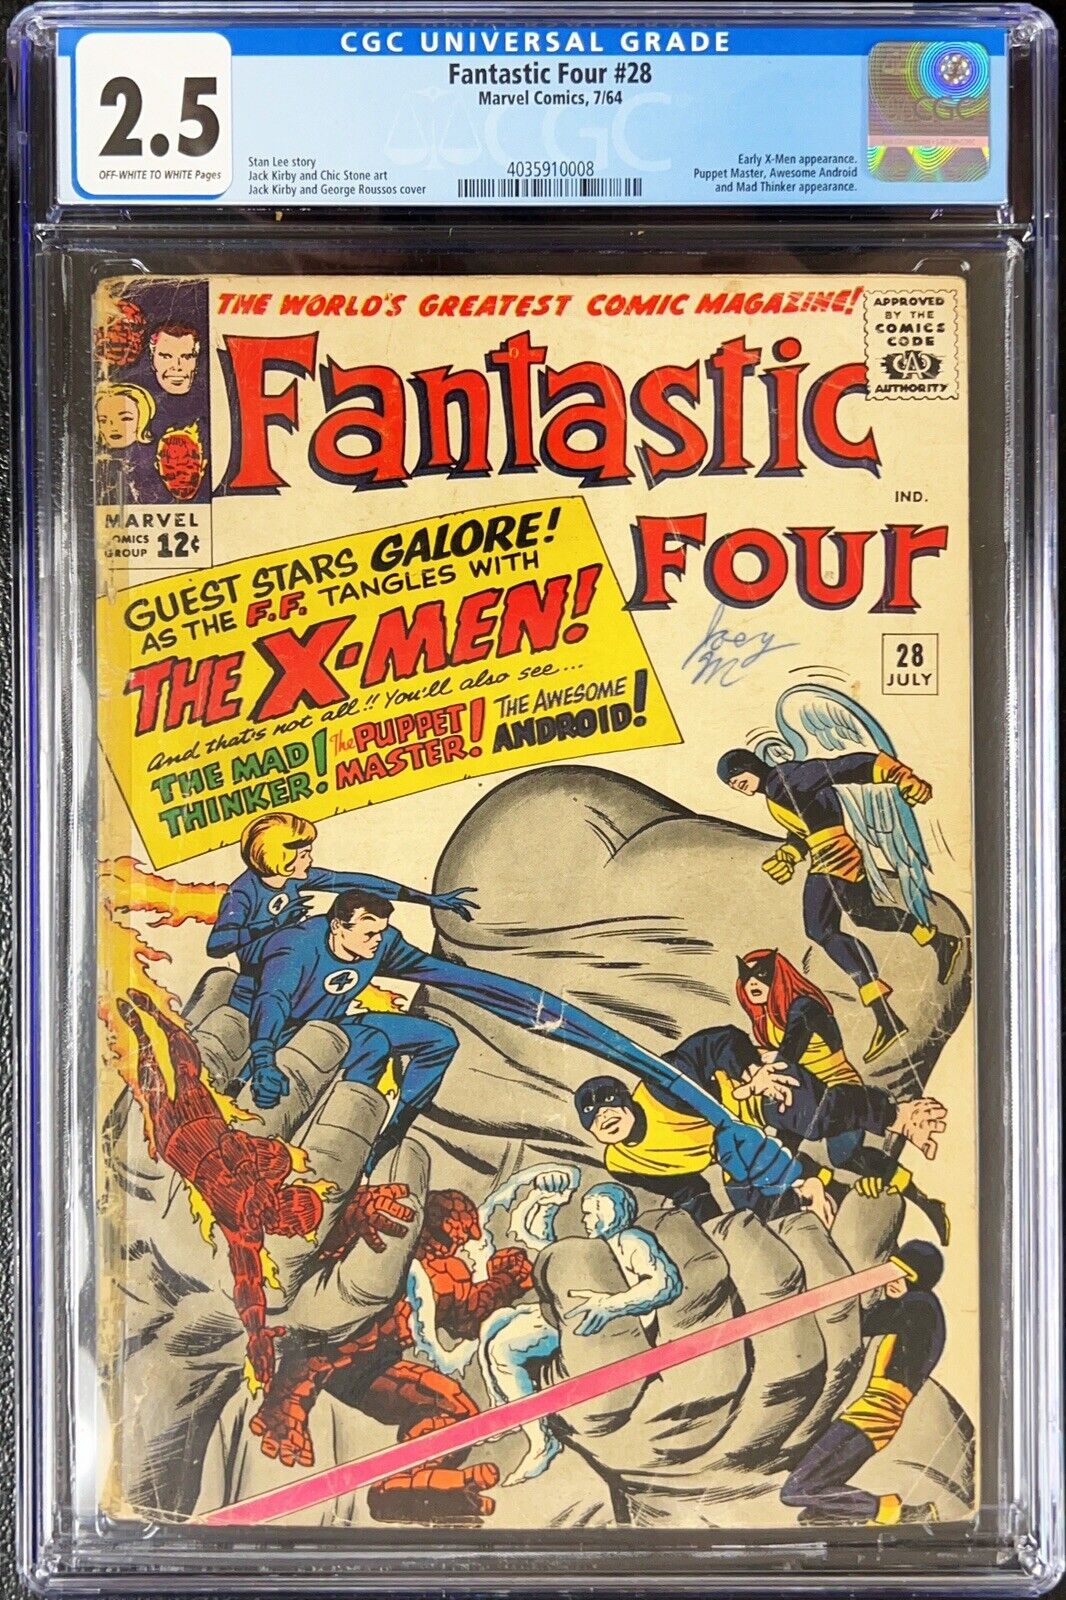 FANTASTIC FOUR #28 CGC 2.5 EARLY X-MEN PUPPET MASTER JACK KIRBY GEORGE ROUSSOS